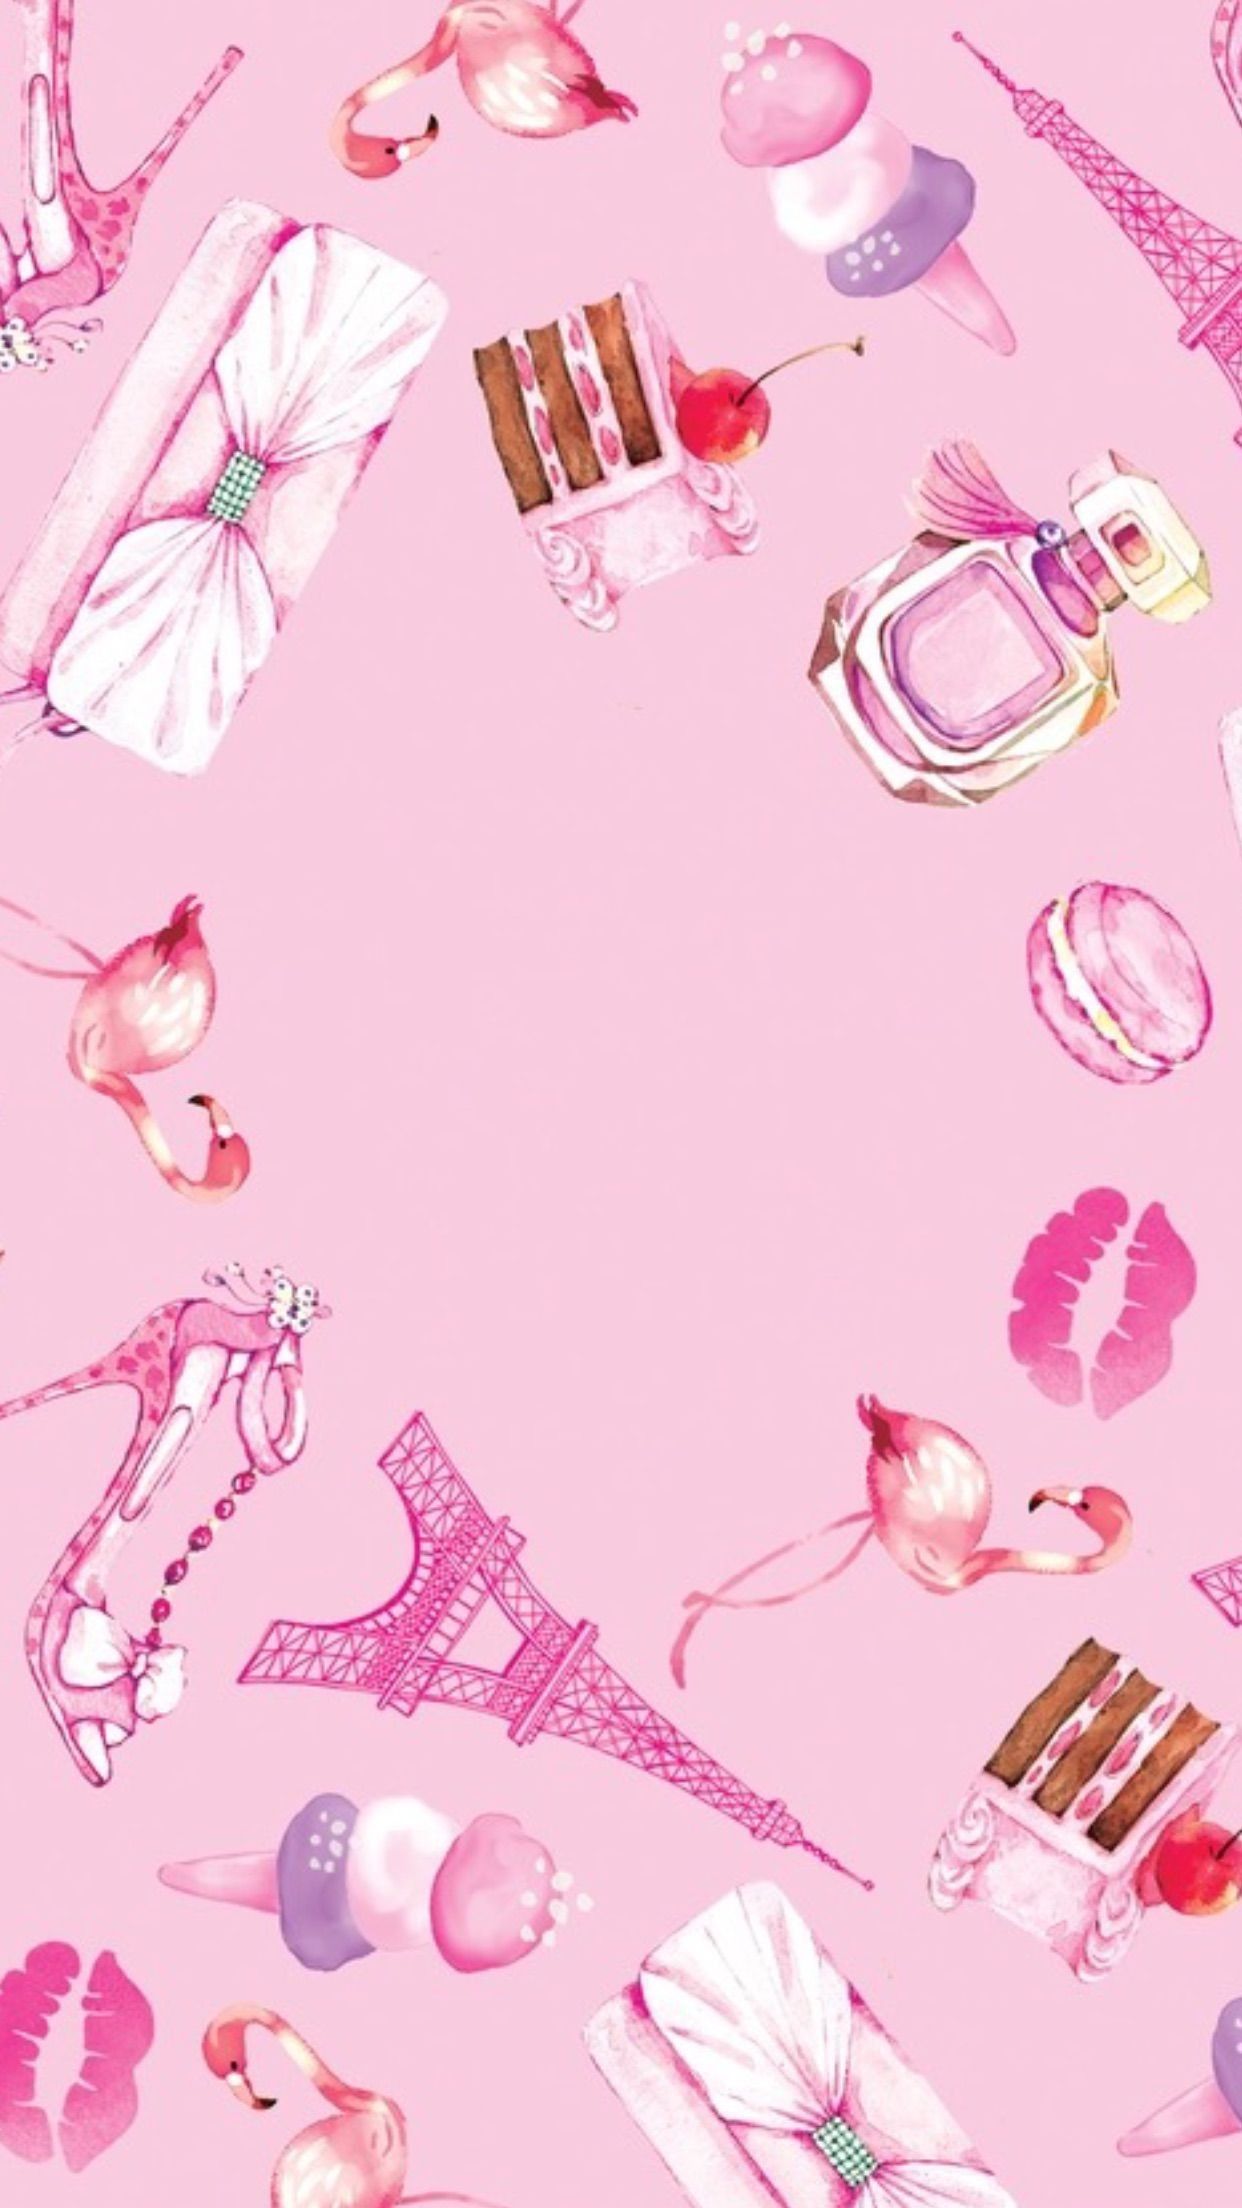 75 Girly Wallpapers for Phones